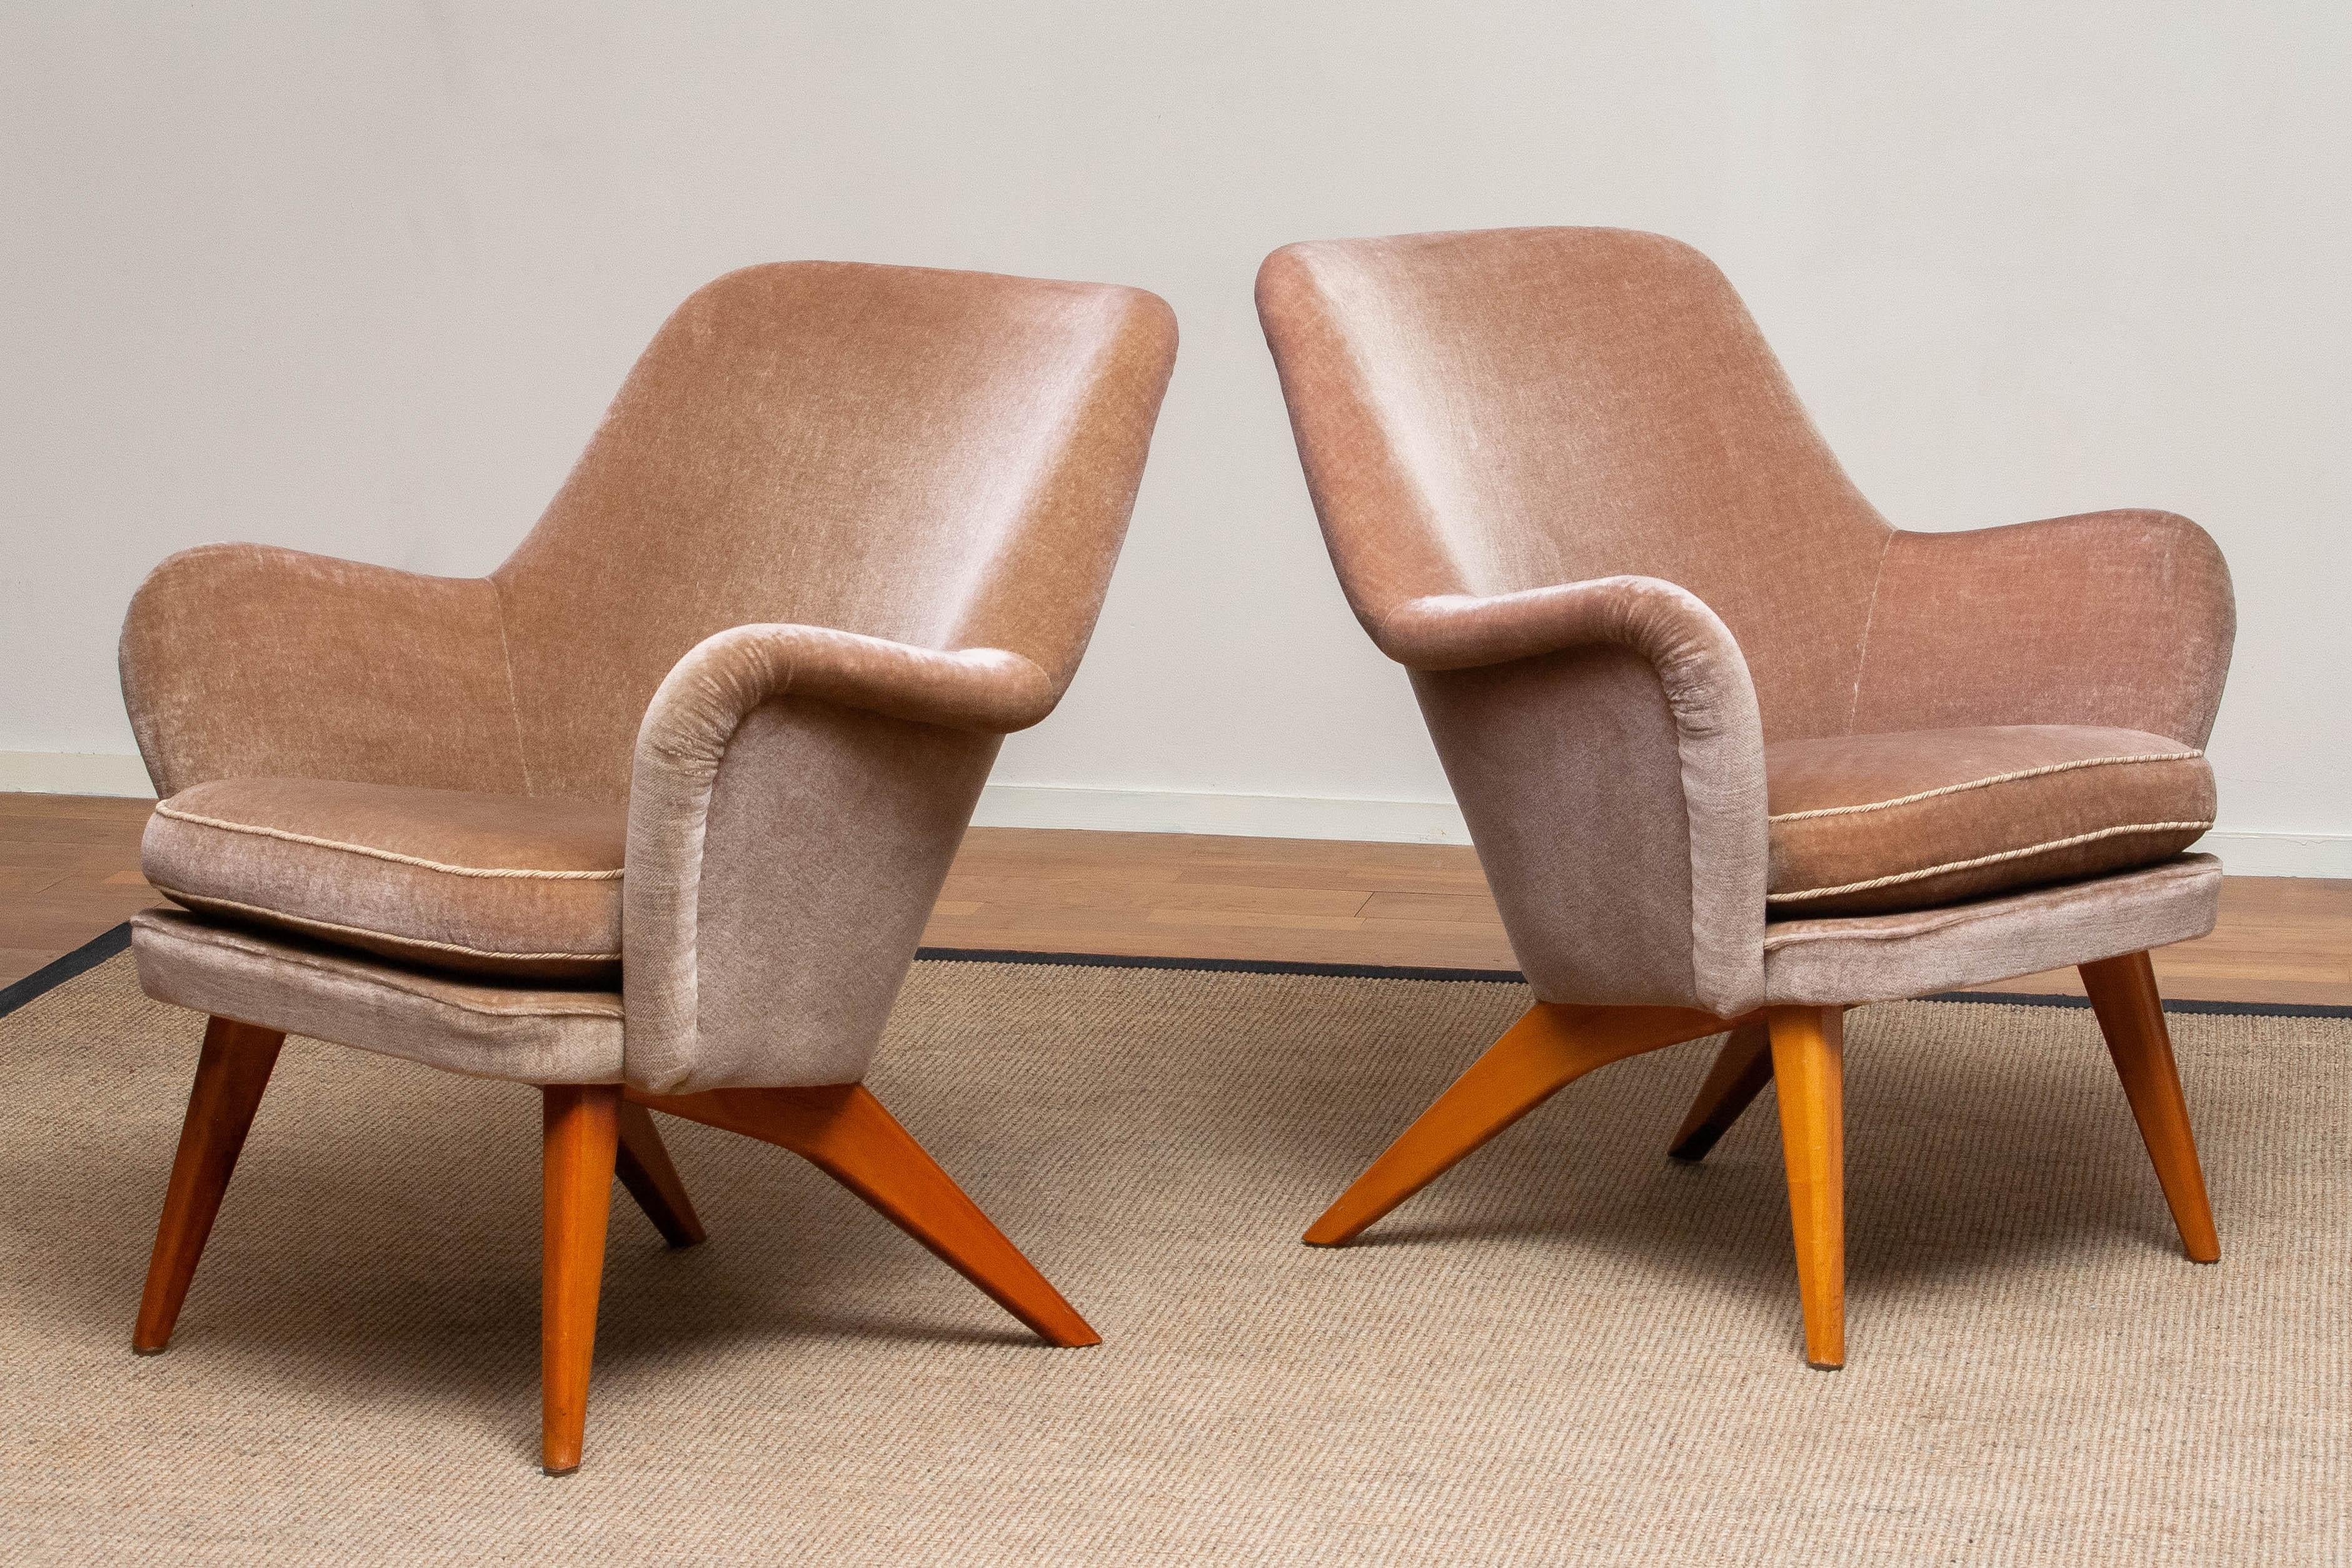 Mid-20th Century 1950s a Pair of Pedro Chairs by Carl Gustav Hiort af Ornäs, Finland